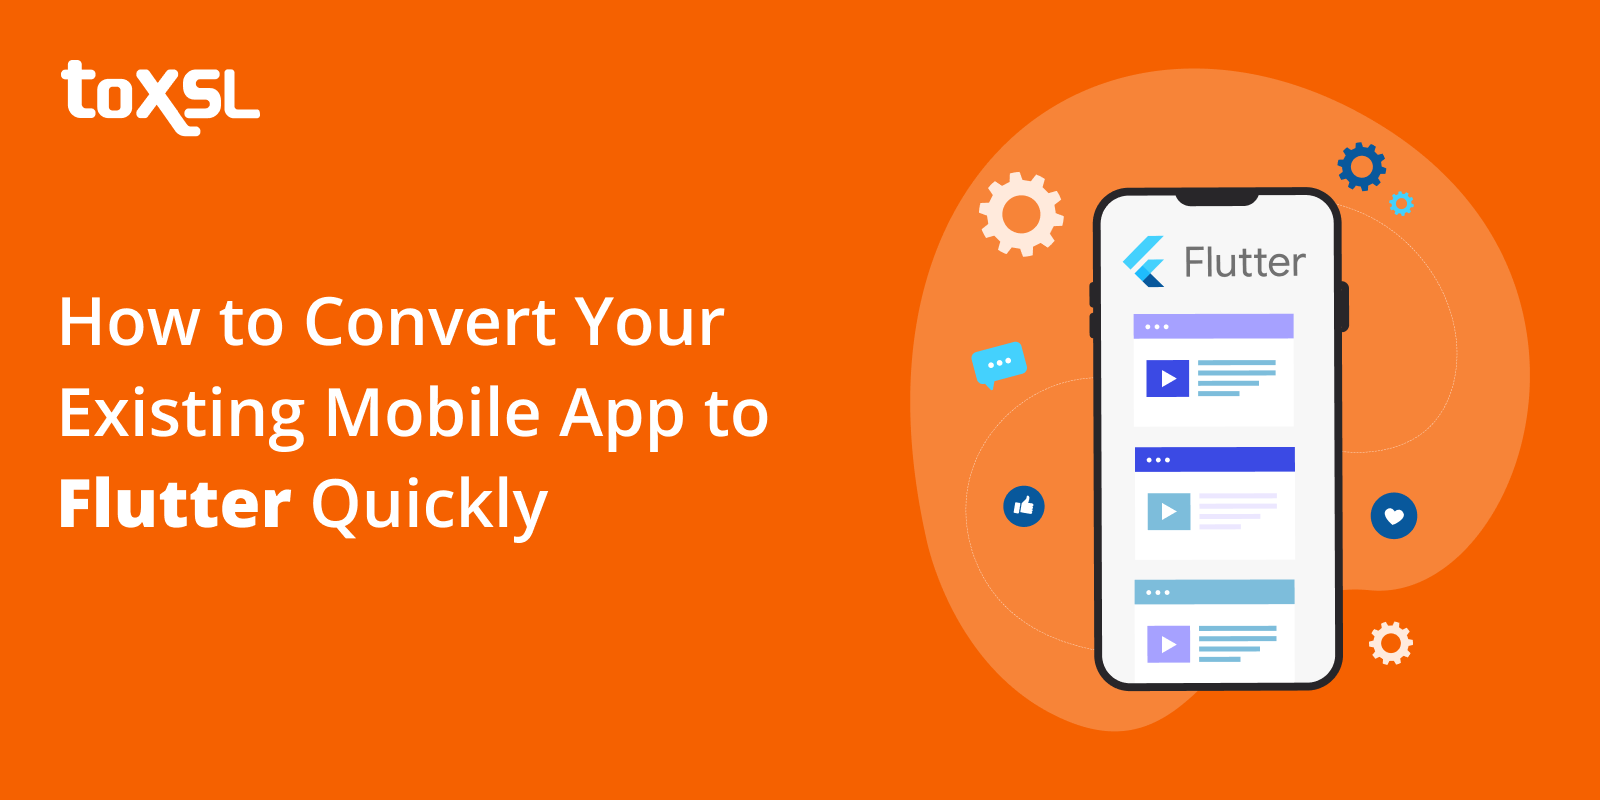 How to Convert Your Existing Mobile App to Flutter Quickly